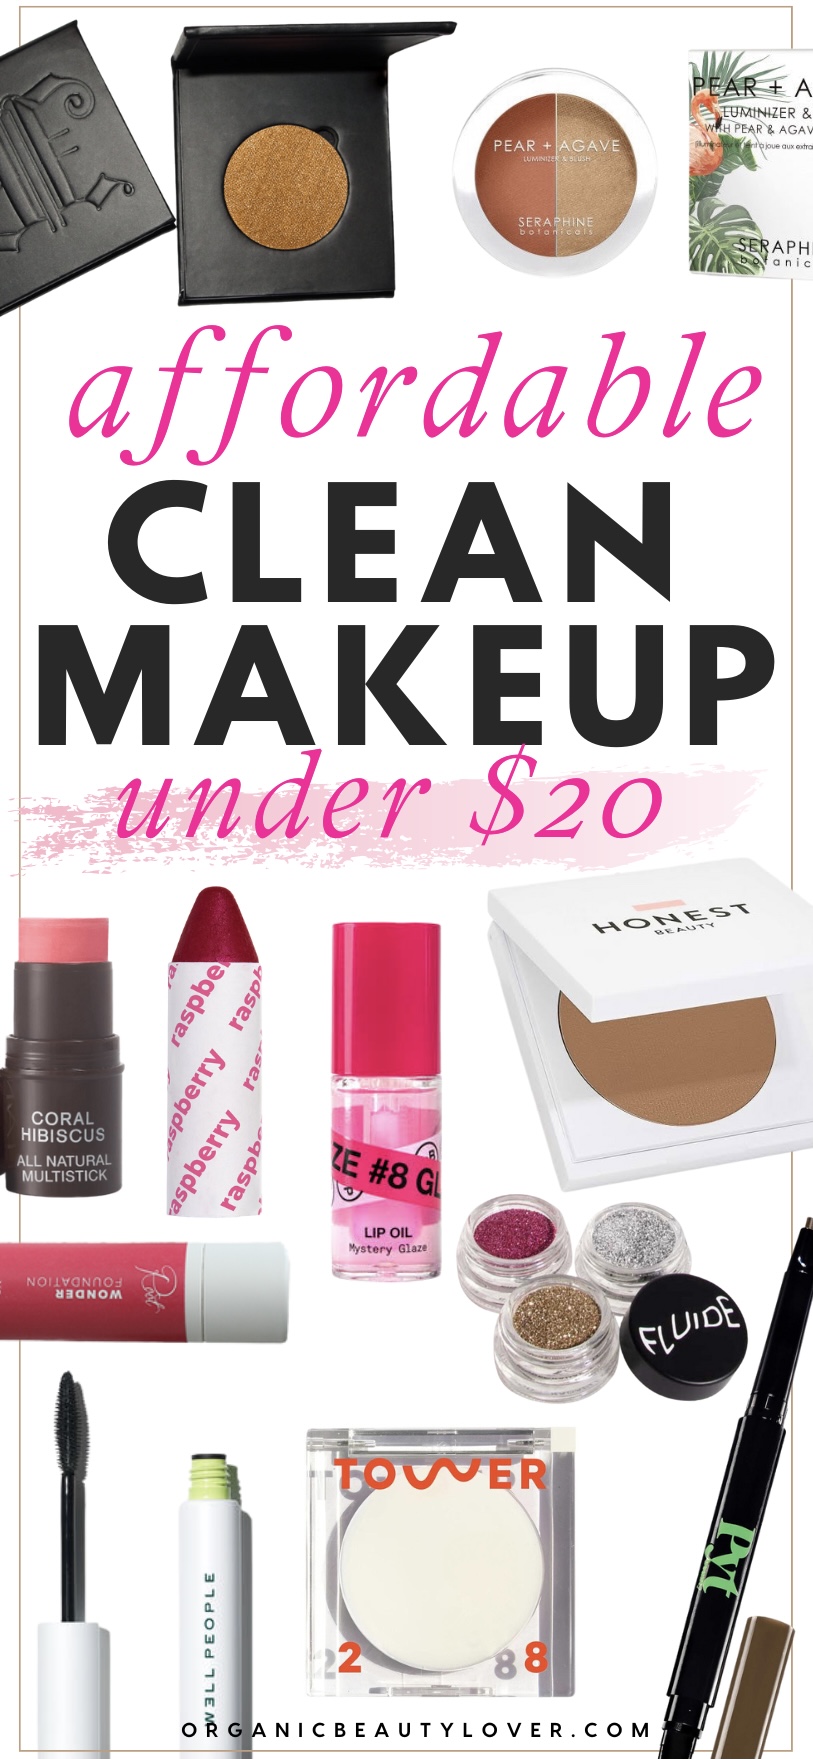 17 Best Affordable Clean Makeup Under $20 - Organic Beauty Lover